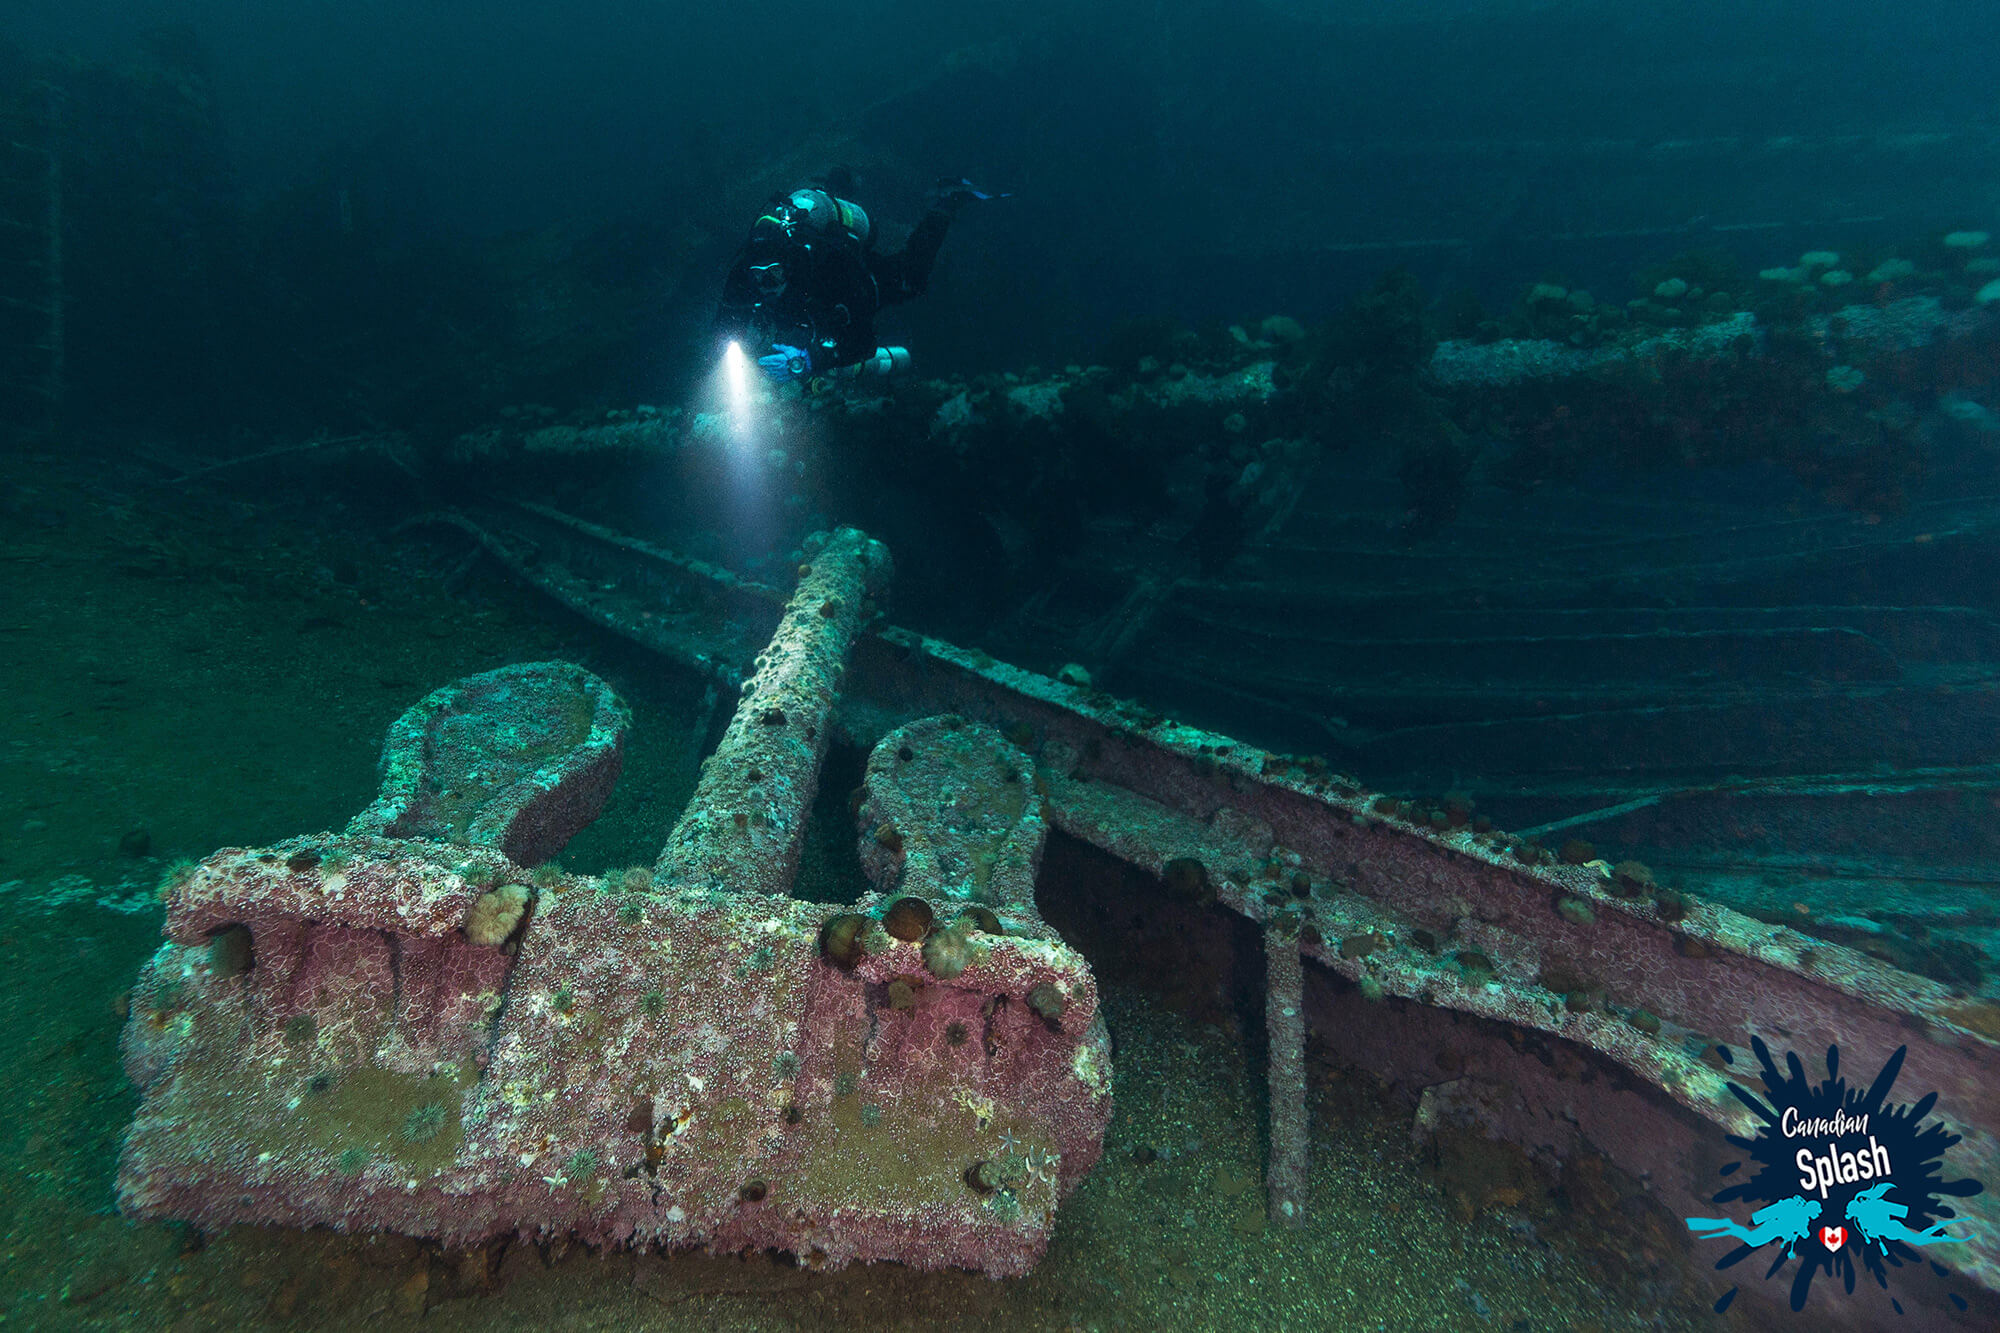 Joey Scuba Diving And Lighting Up A Large Anchor On The Deck Of The Saganaga Bell Island Shipwreck, Newfoundland, Scuba Diving Canada